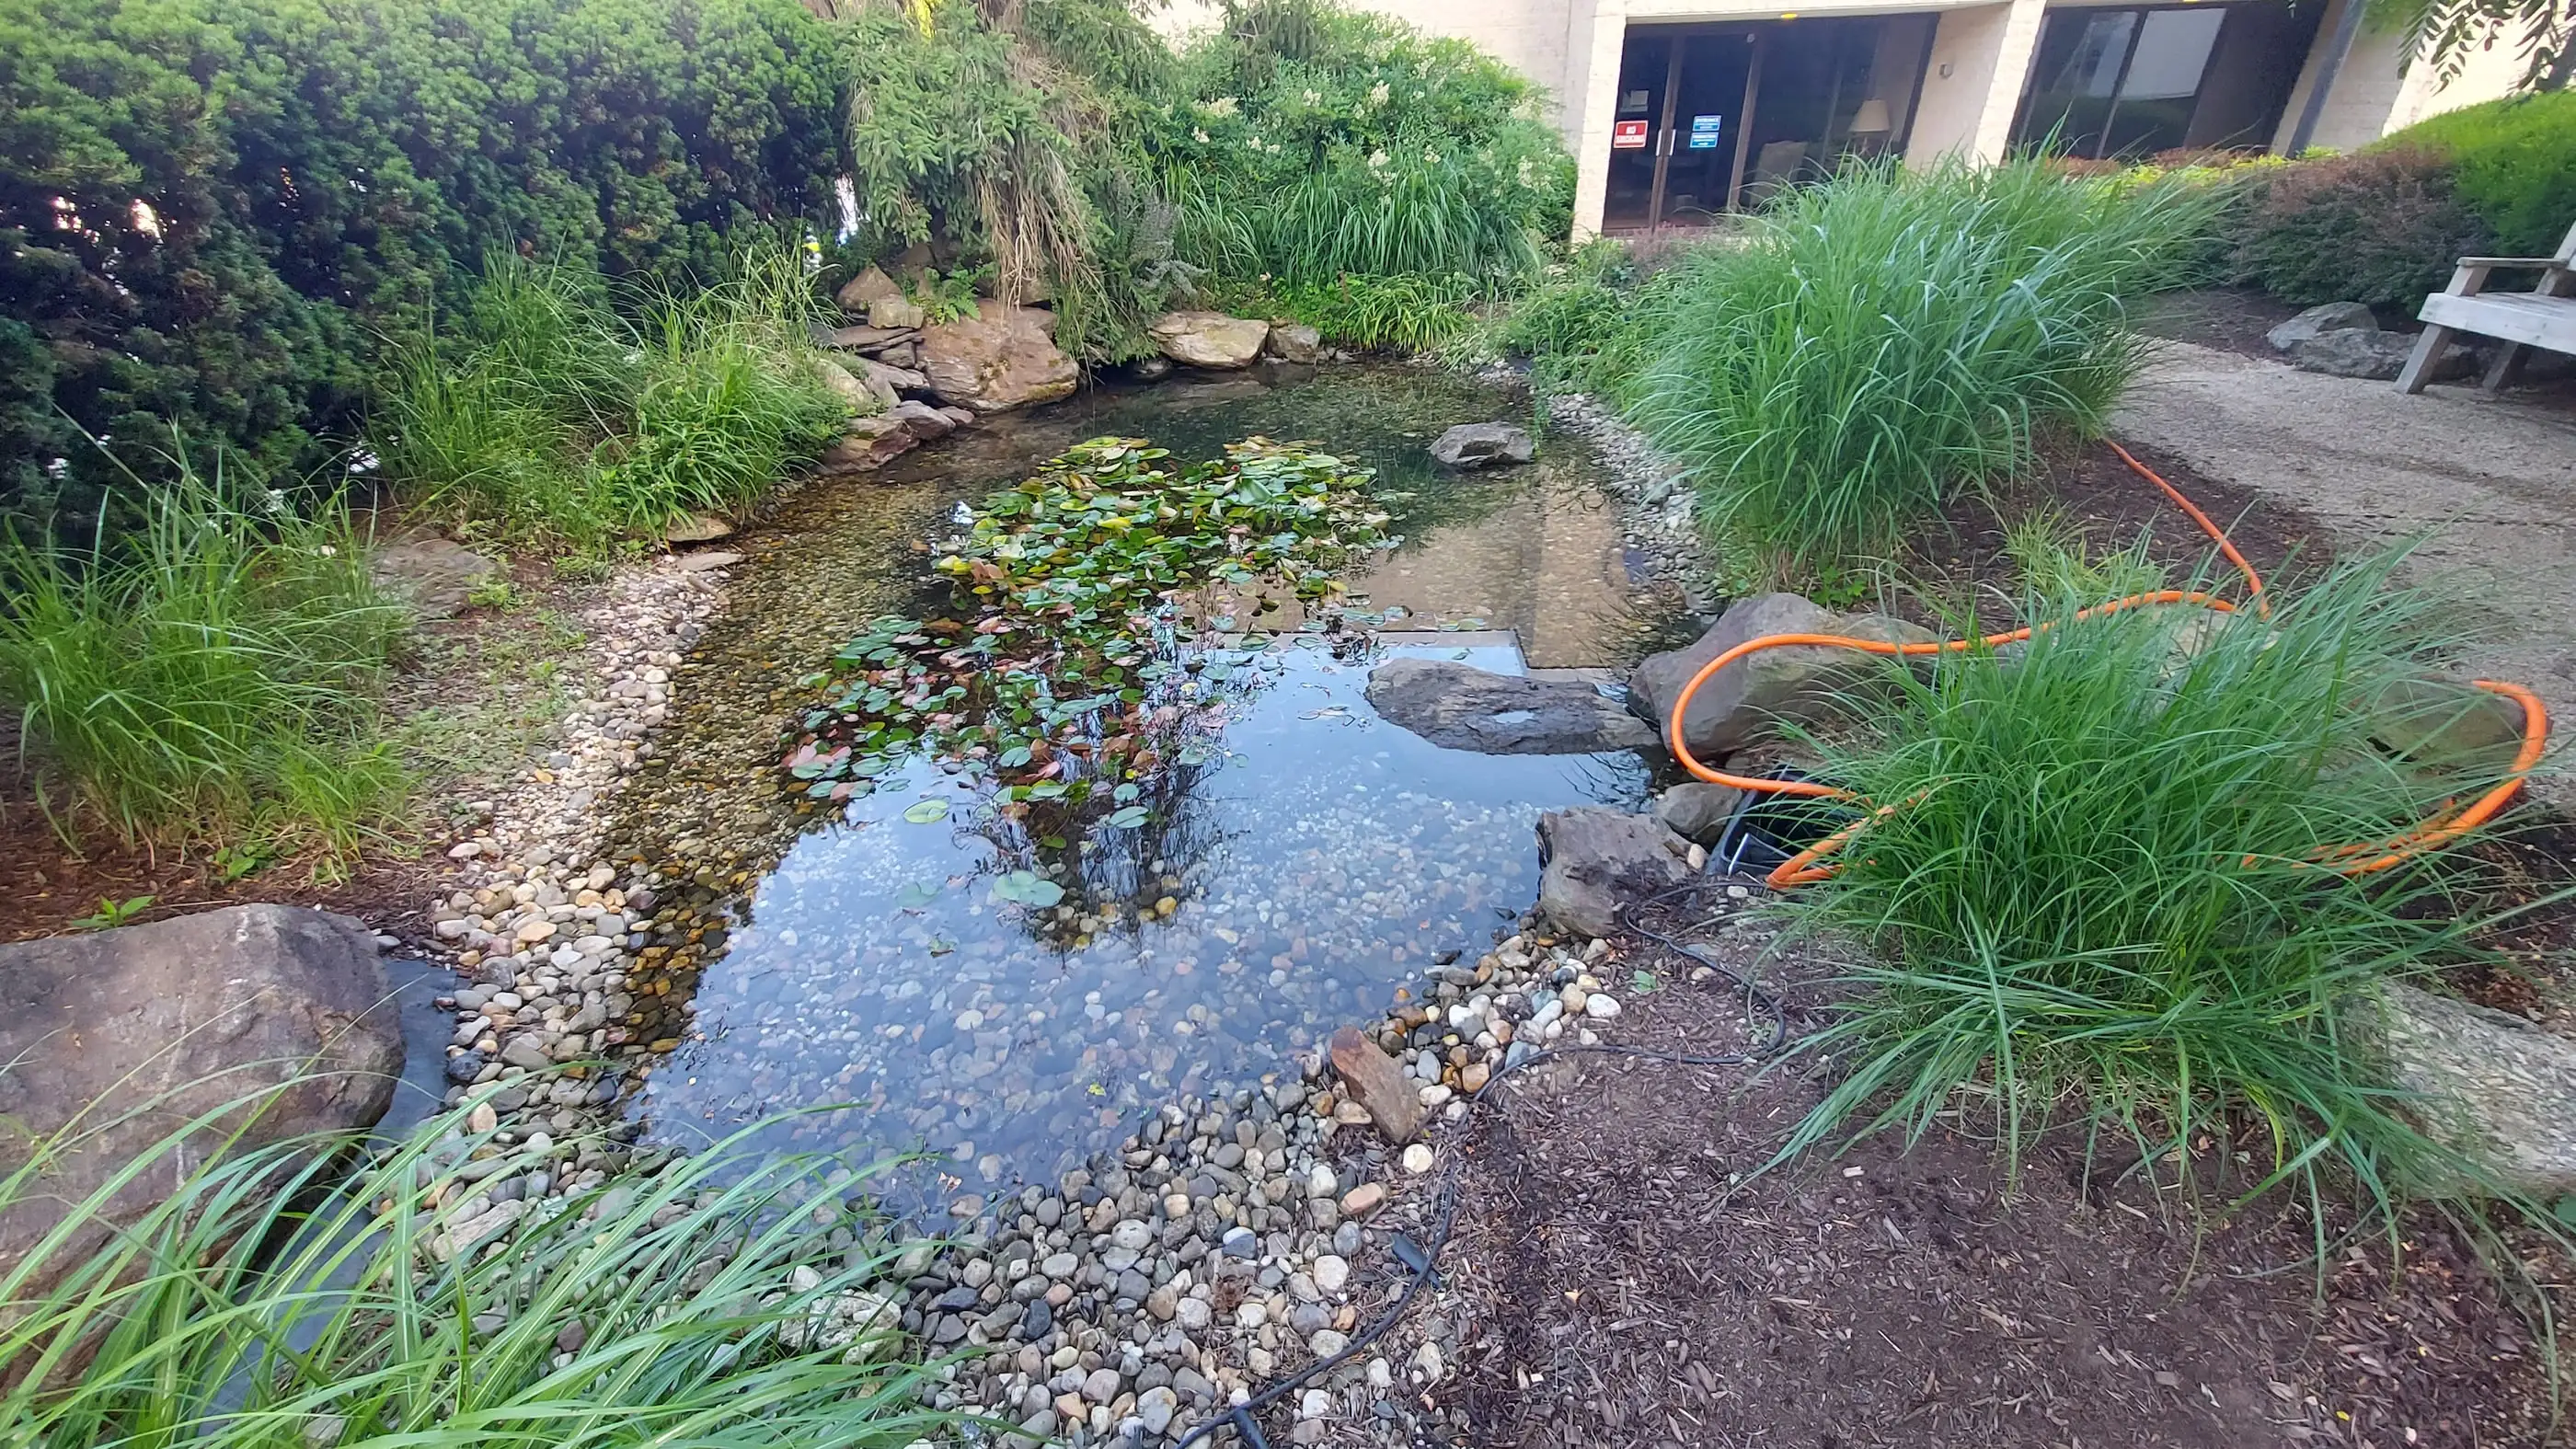 large commercial property pond cleaned. We removed fifty percent of the waterlilies and hundreds of ponds of muck and debris. Removing the lilies allows for better circulation in the pond.